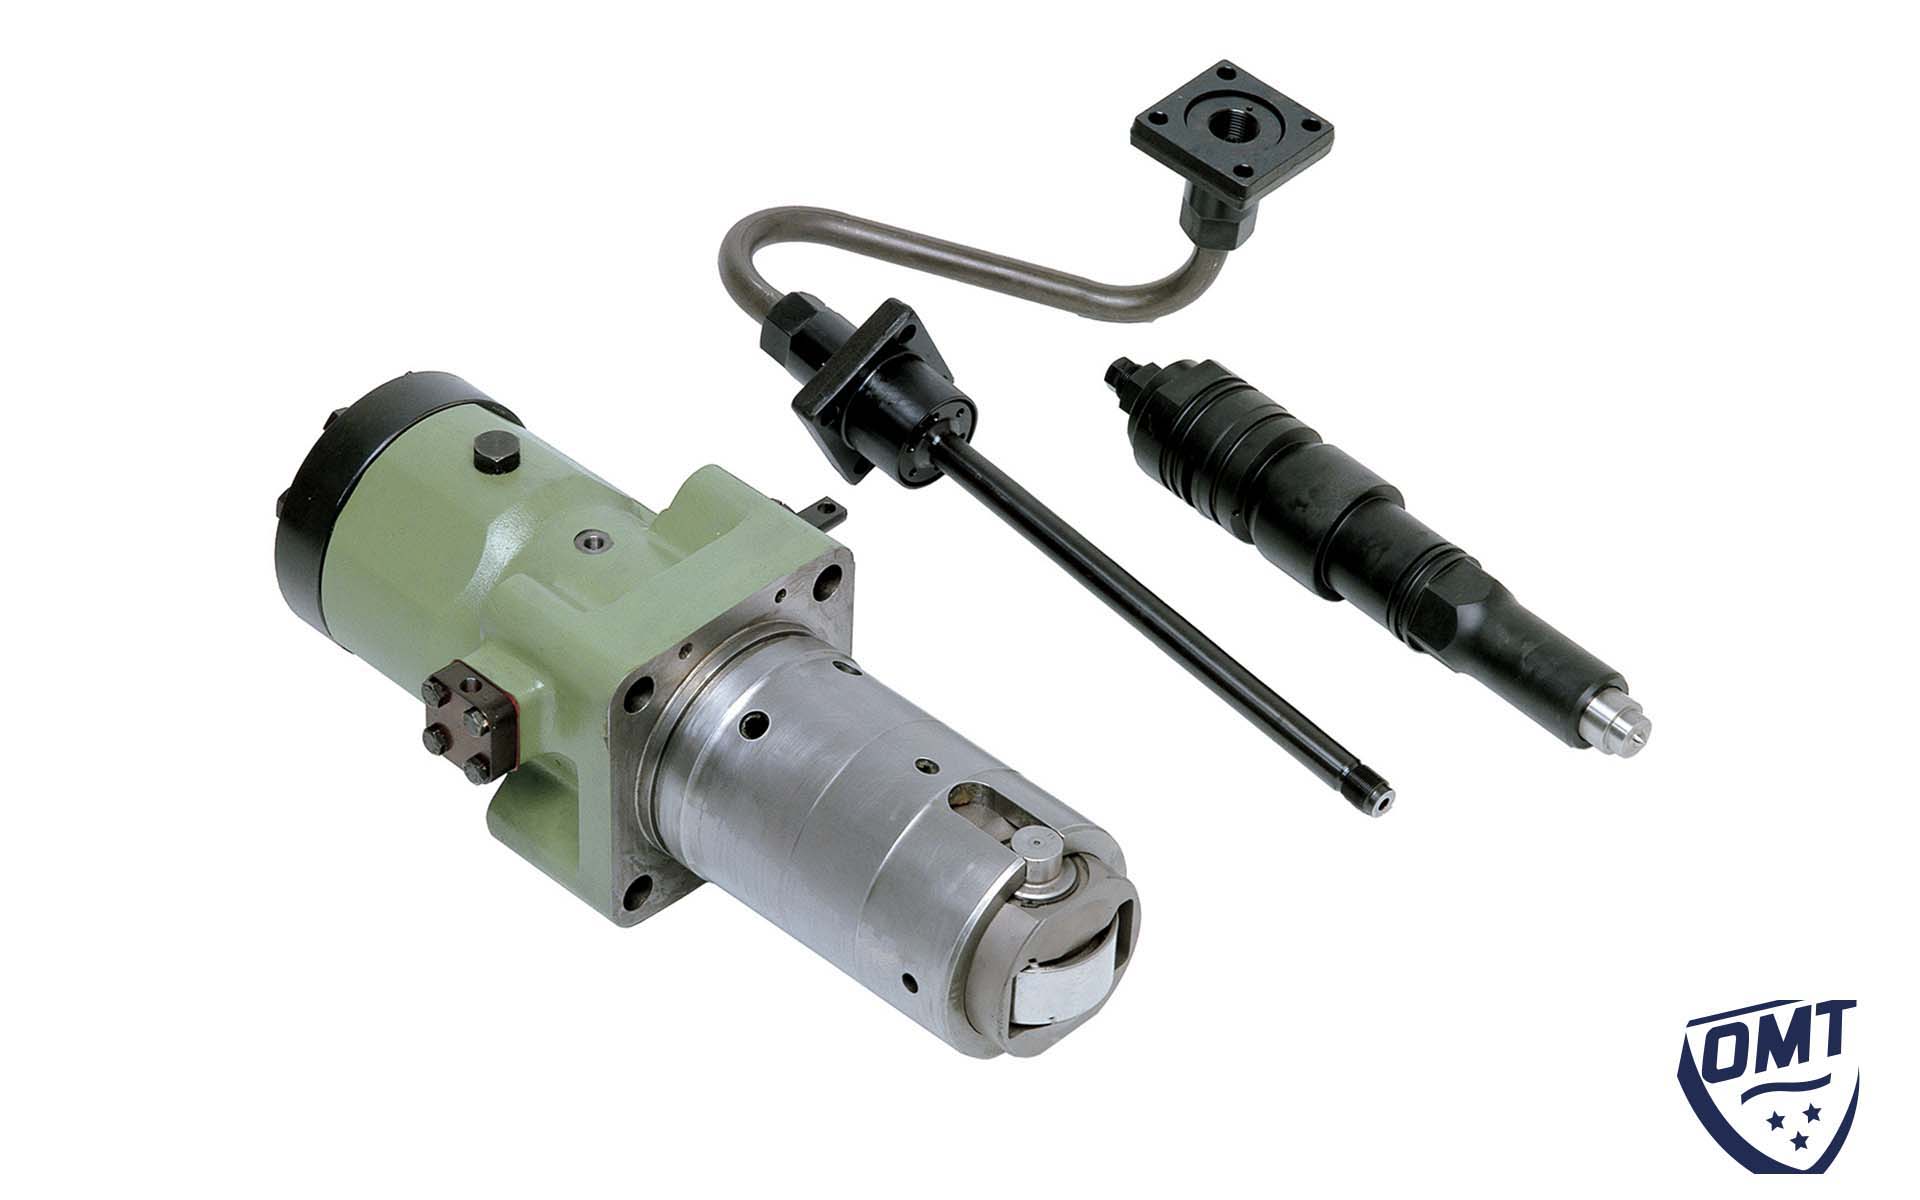 Conventional ‘pump-line-nozzle’ injection systems for diesel fuel and heavy fuel oil